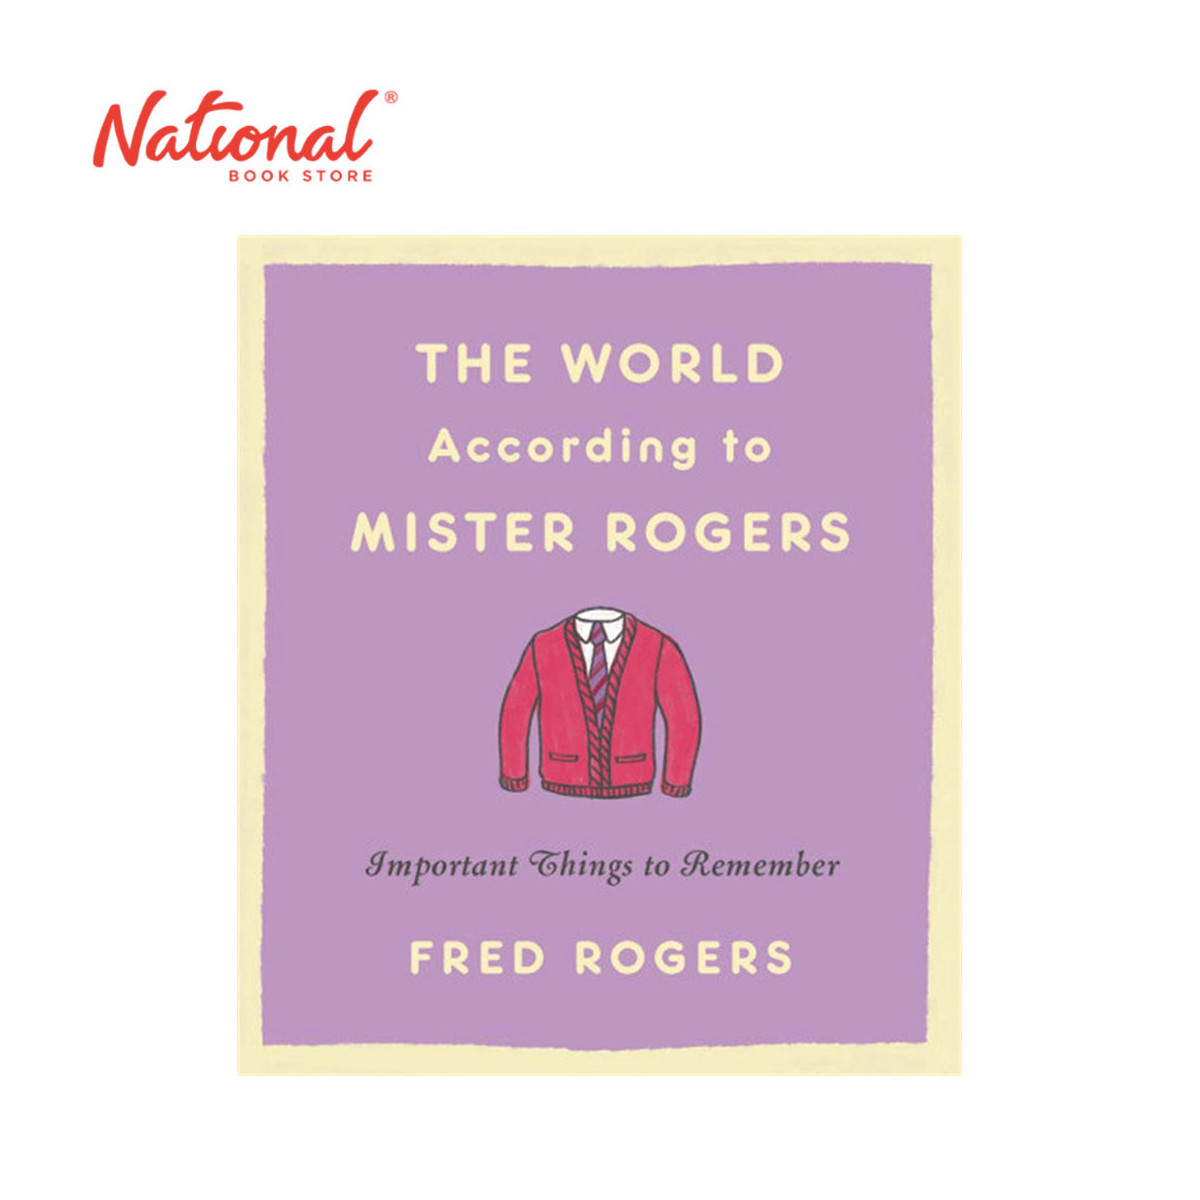 The World According to Mister Rogers: Important Things to Remember by Fred Rogers - Hardcover